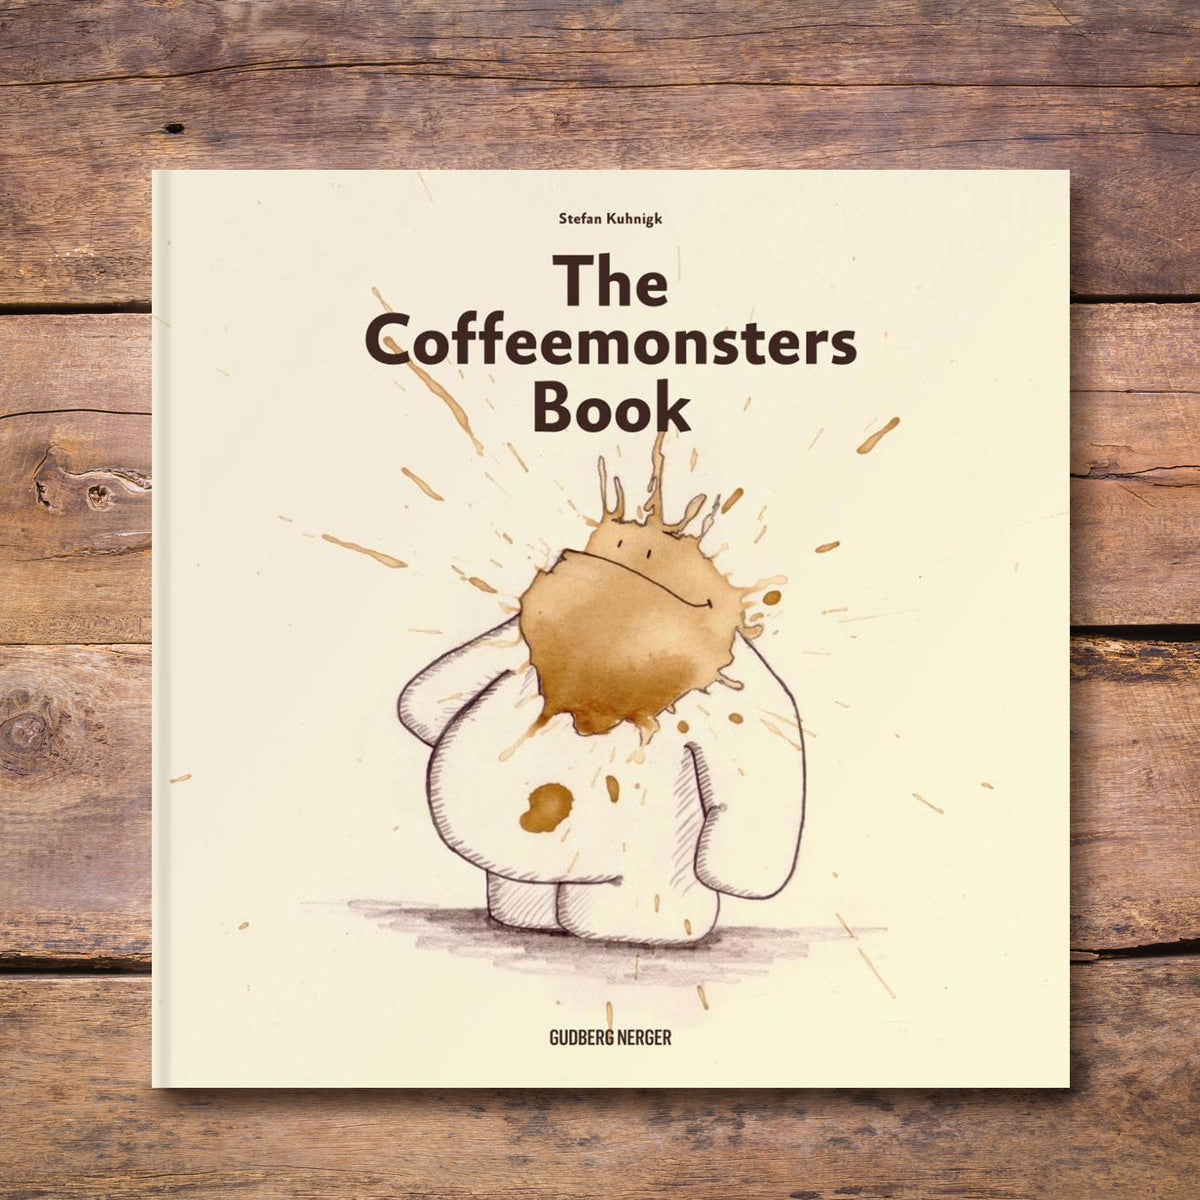 thecoffeemonsters